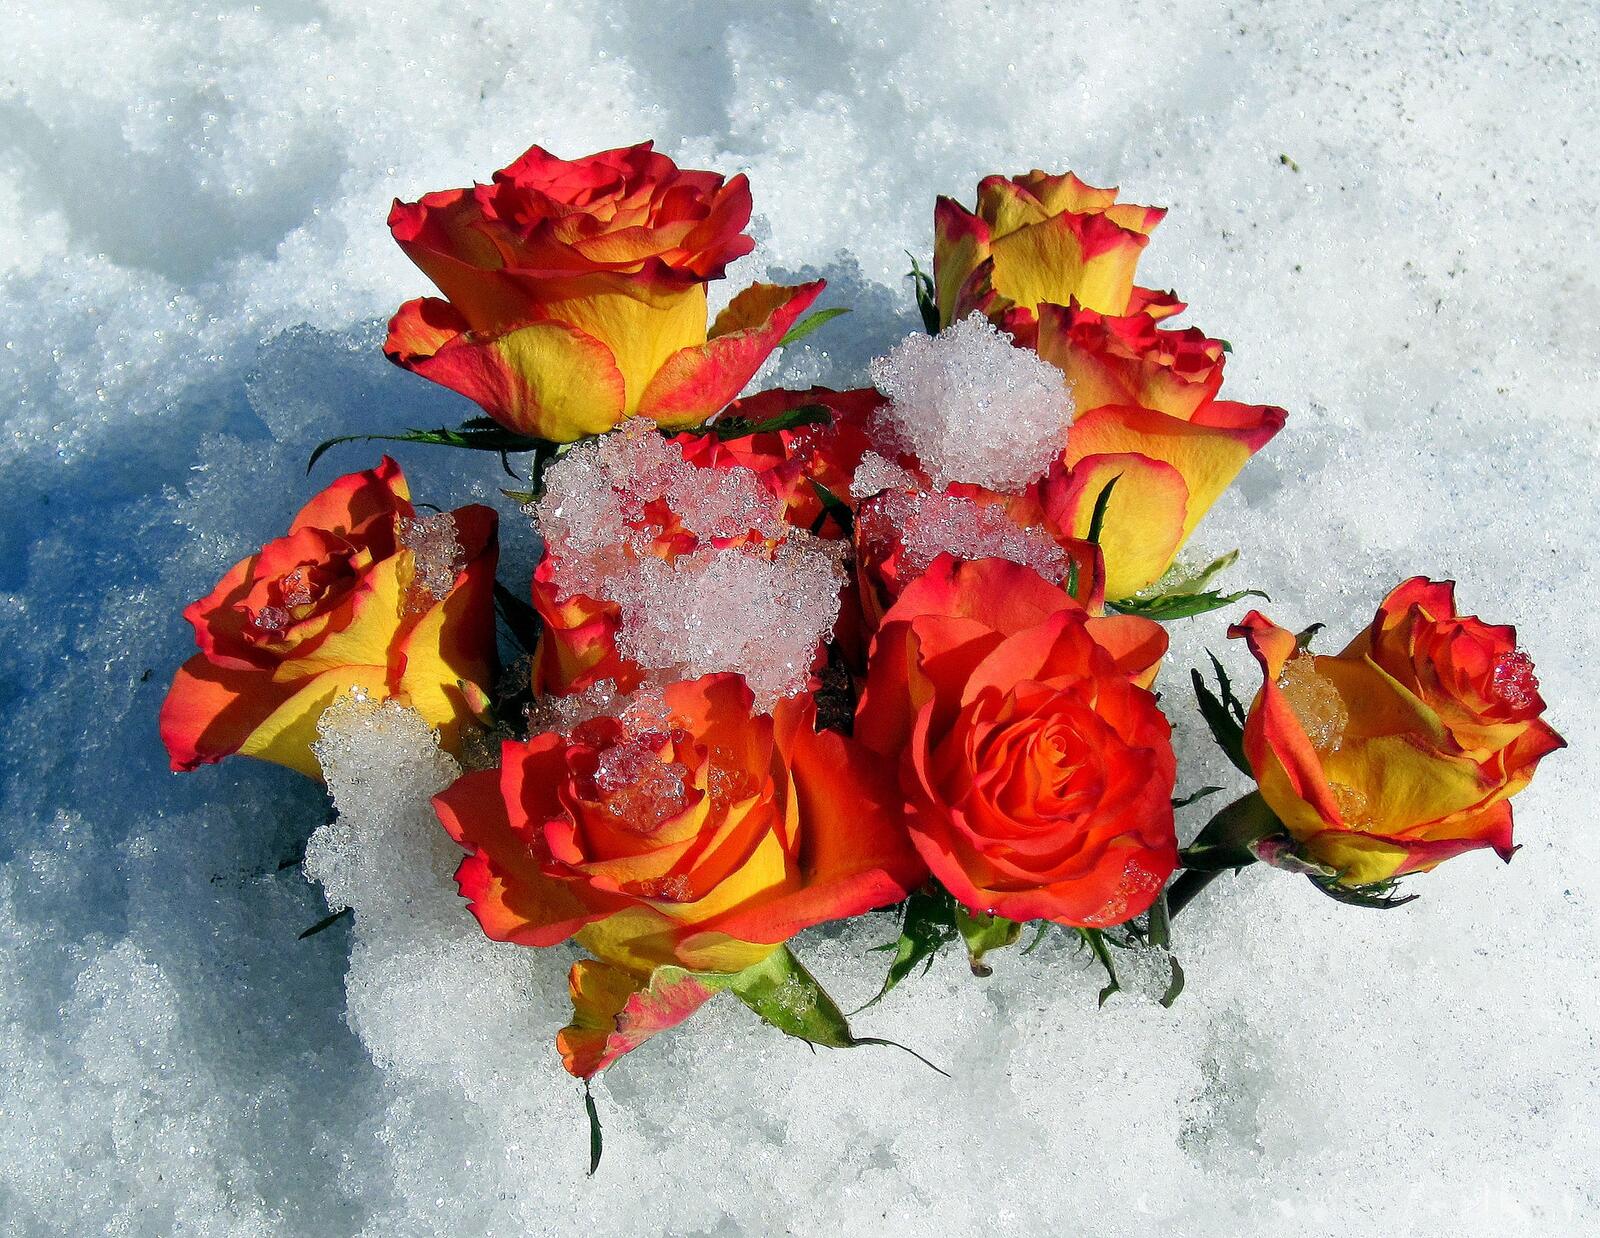 Wallpapers Rose on the snow flowers roses on the desktop